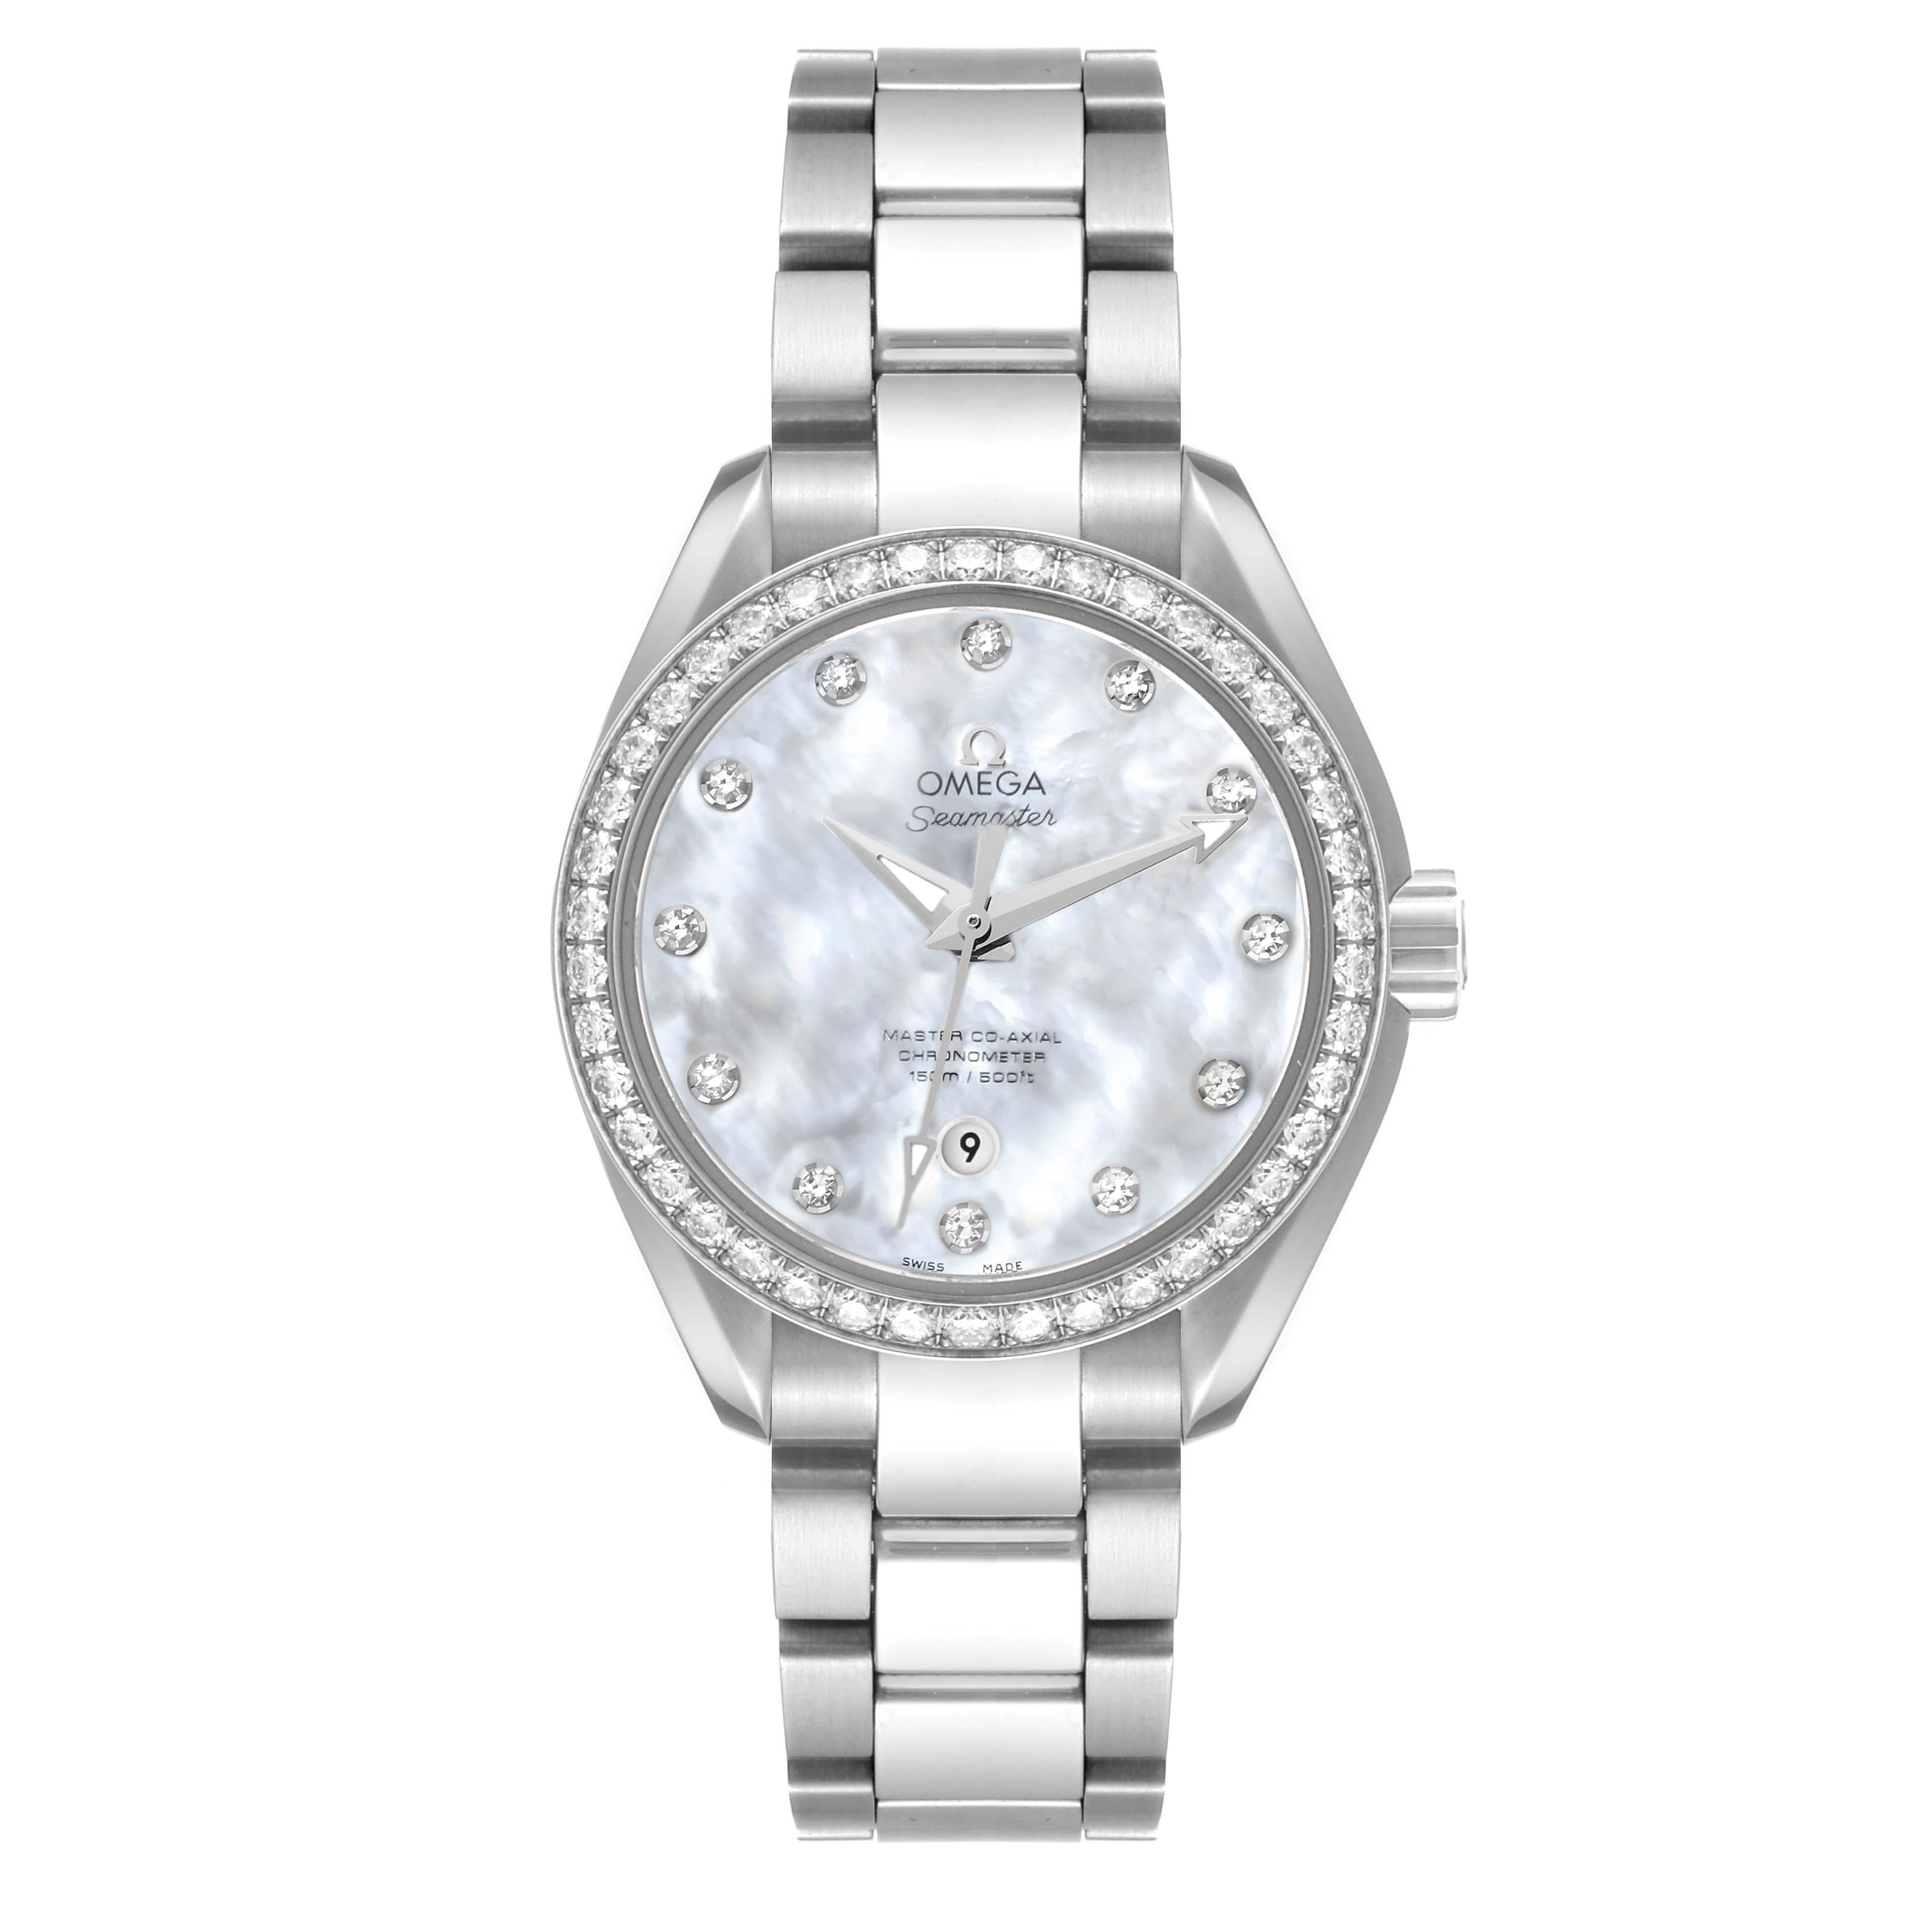 Omega Aqua Terra Mother of Pearl Steel Diamond Ladies Watch 231.15.34.20.55.002. Automatic self-winding movement. Stainless steel round case 34 mm in diameter. Exhibition transparent sapphire crystal caseback. Stainless steel bezel set with original